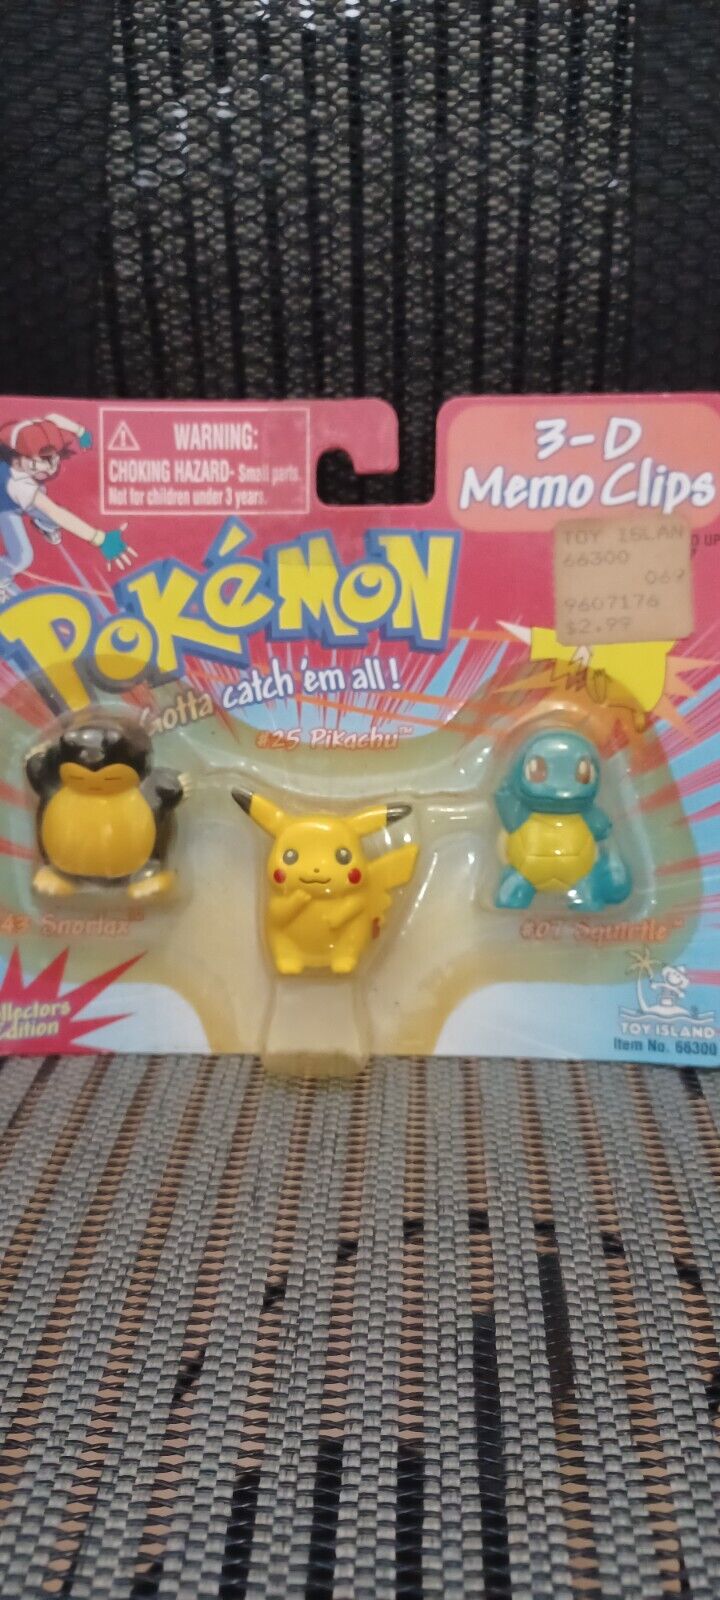 VINTAGE 1999 POKEMON 3-D MEMO CLIPS SNORLAX,PIKACHU,SQUIRTLE FACTORY SEALED